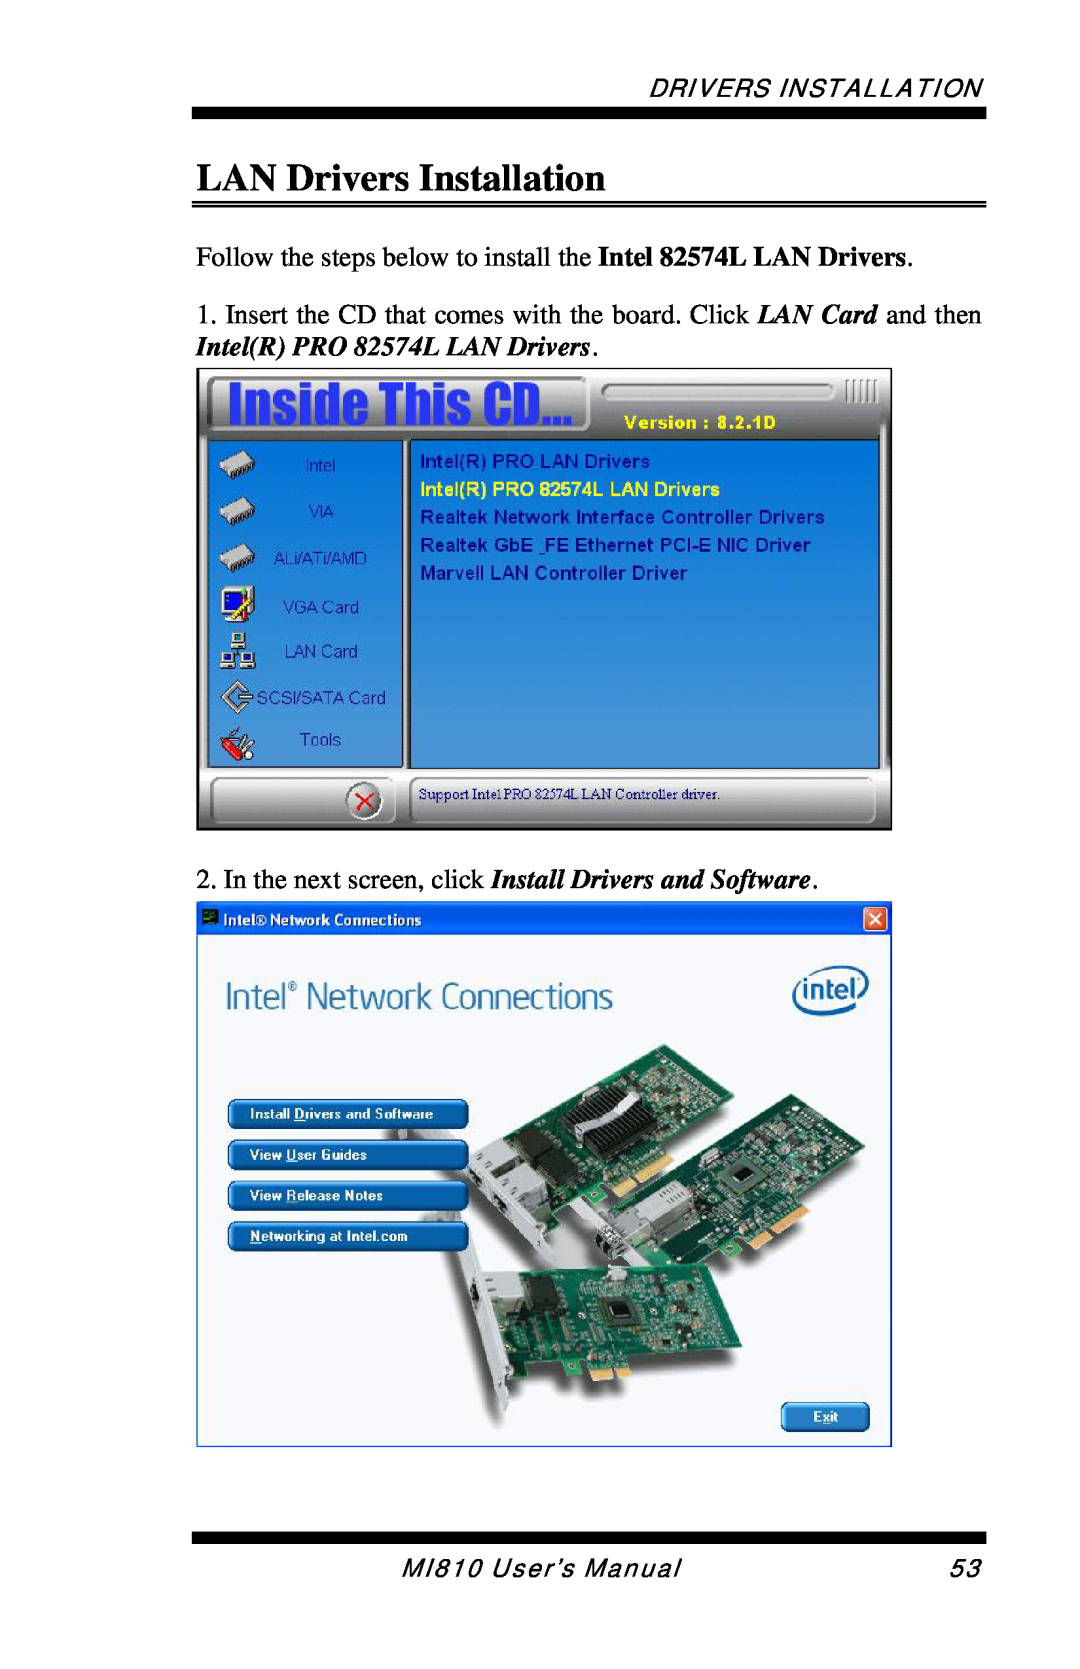 Intel user manual LAN Drivers Installation, In the next screen, click Install Drivers and Software, MI810 User’s Manual 